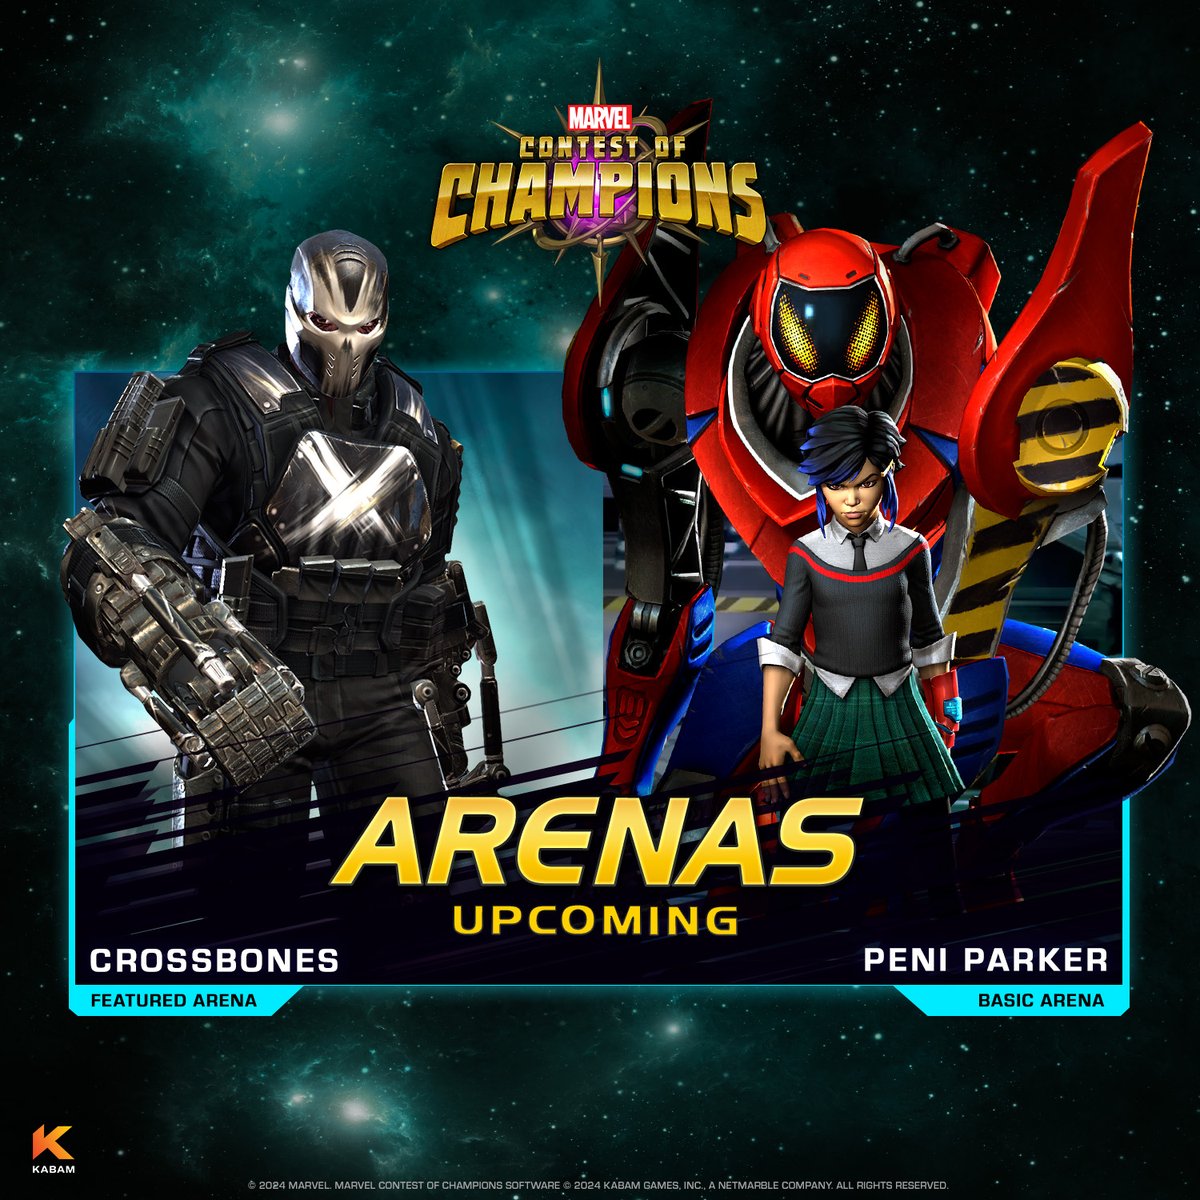 🚨 Exciting Arenas Ahead 🚨 Featured ➡️ Crossbones Basic ➡️ Peni Parker Launching on May 2